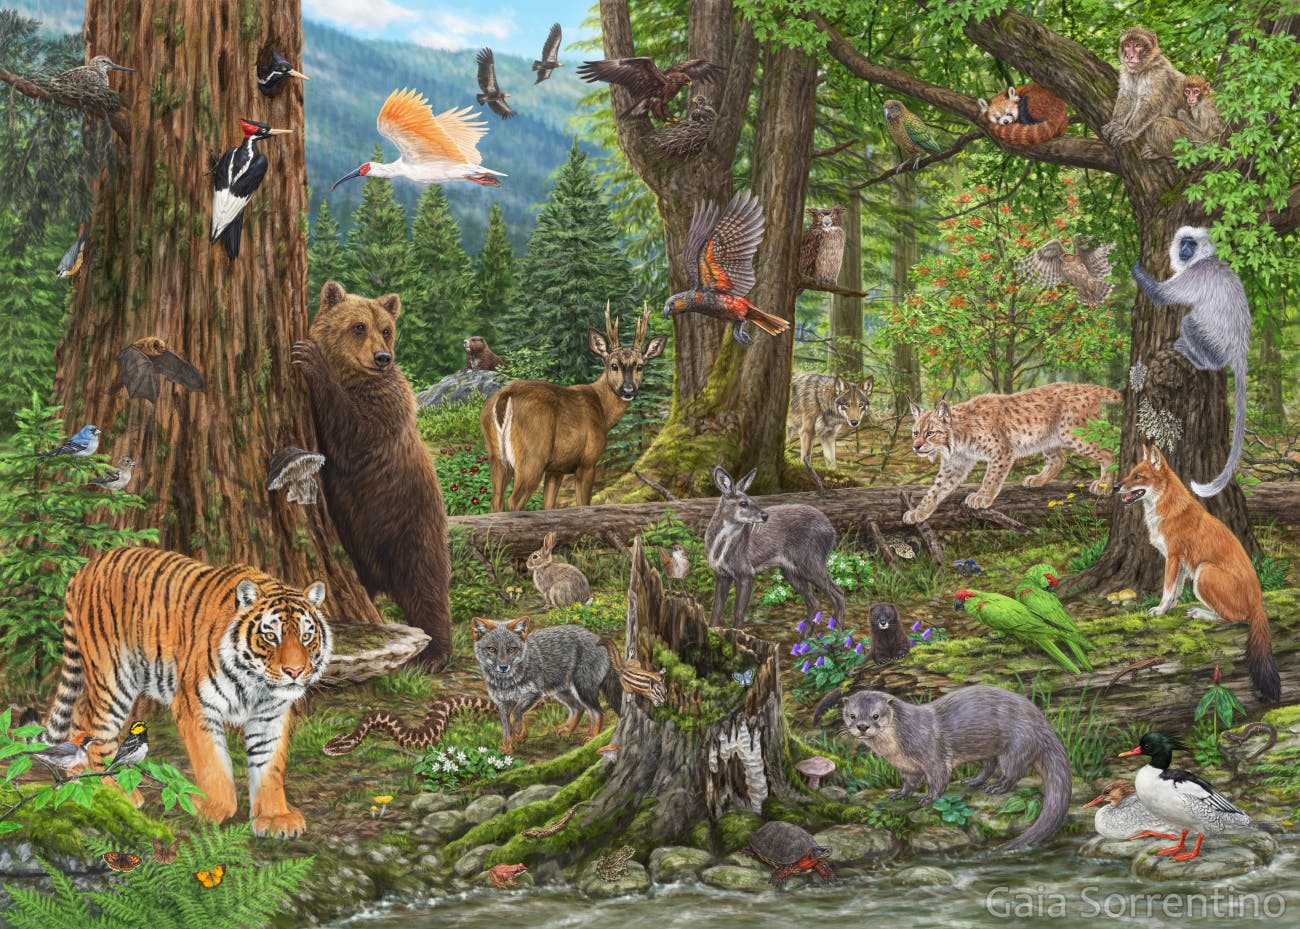 A forest scene with lots of animals